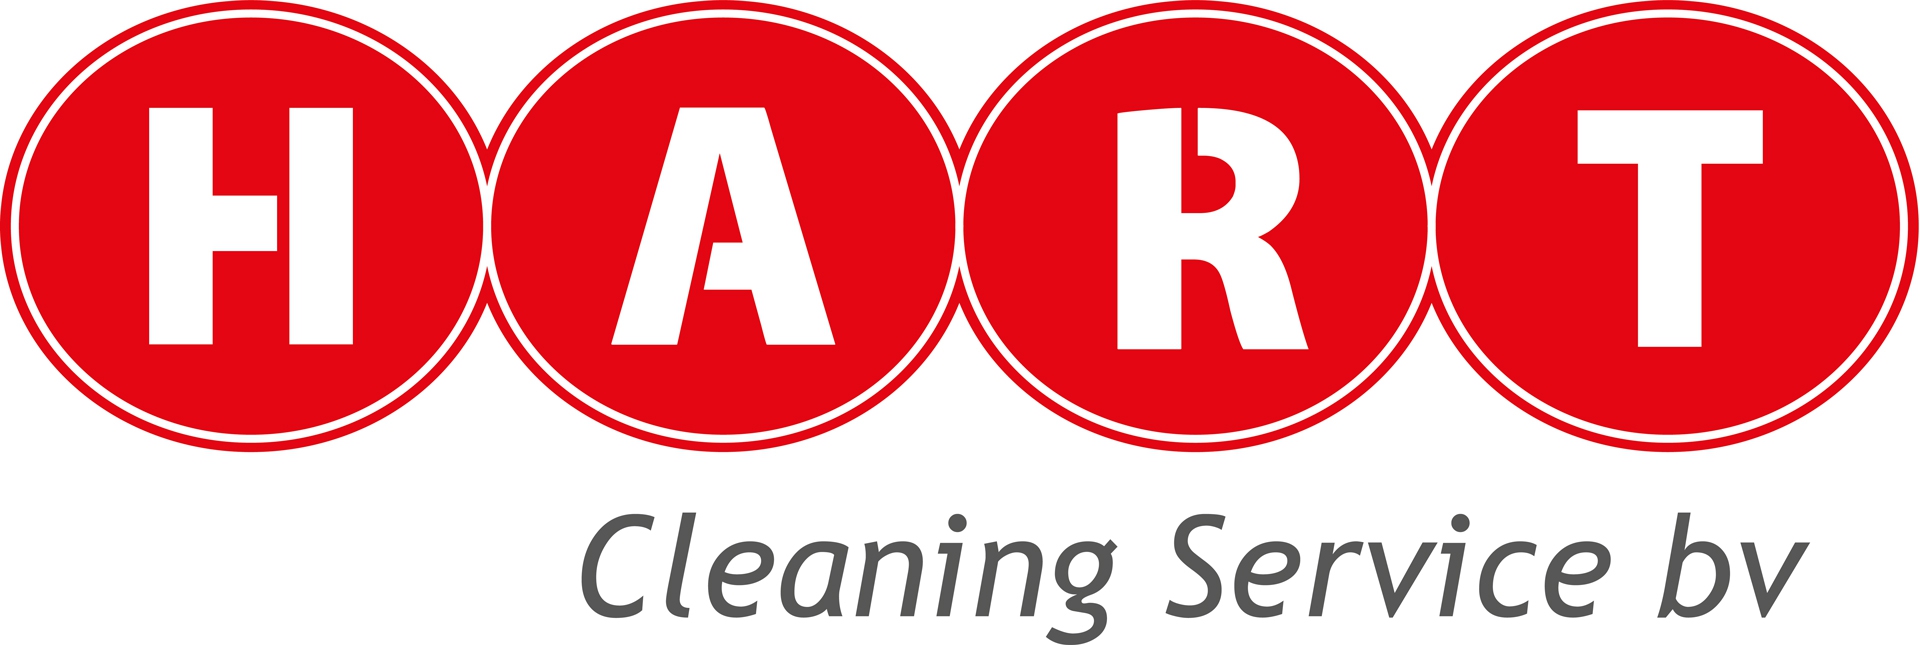 Hart-Cleaning-Service